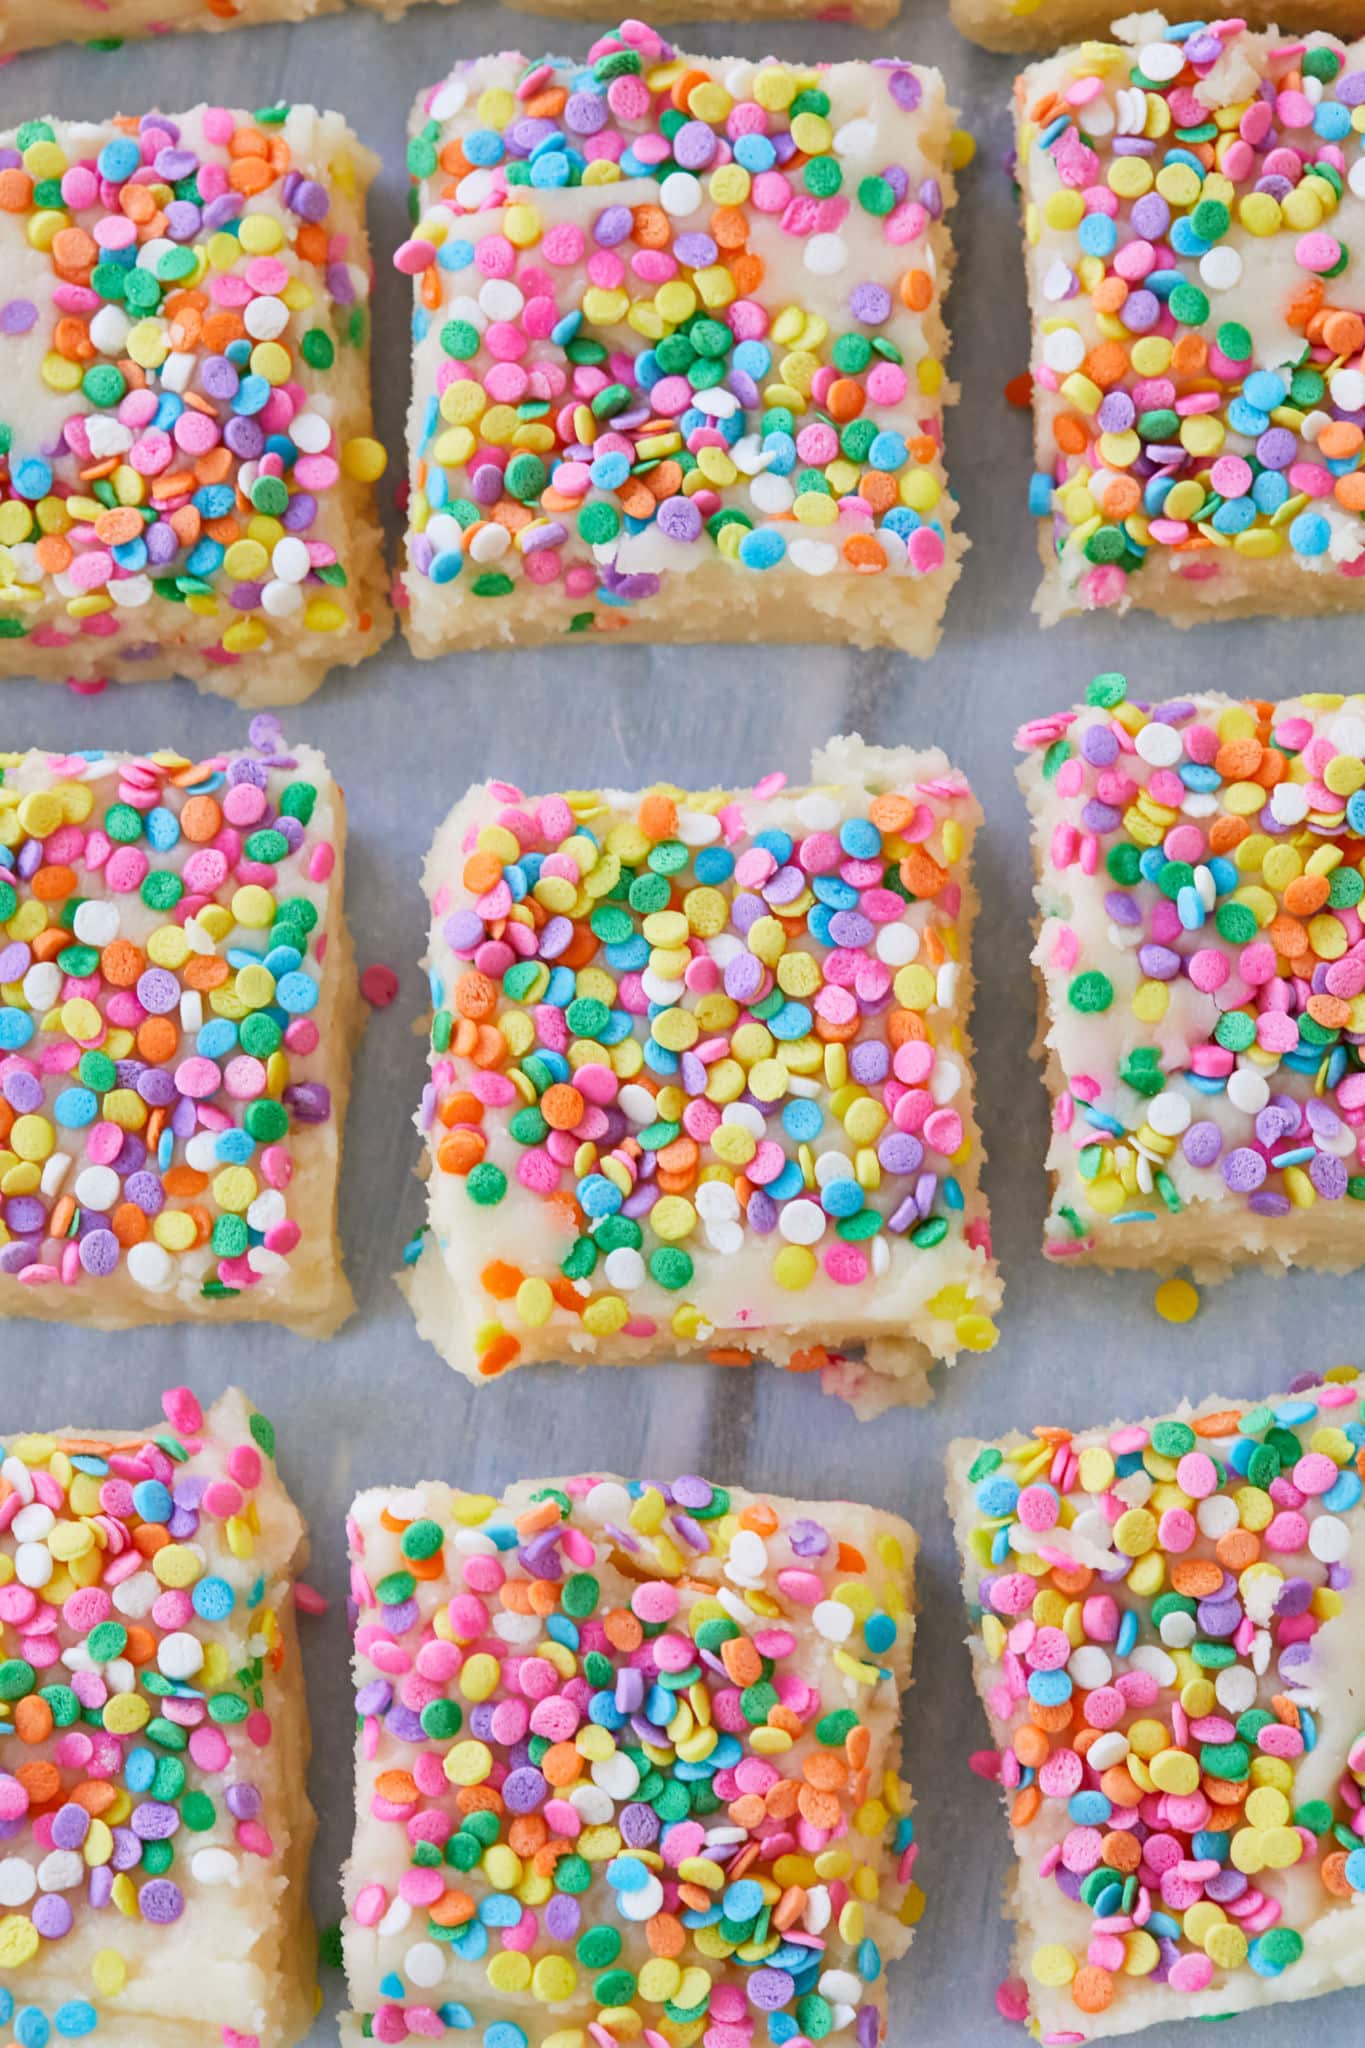 Homemade Funfetti Fudge is cut into squares. The white fudge is covered in rainbow sprinkles.